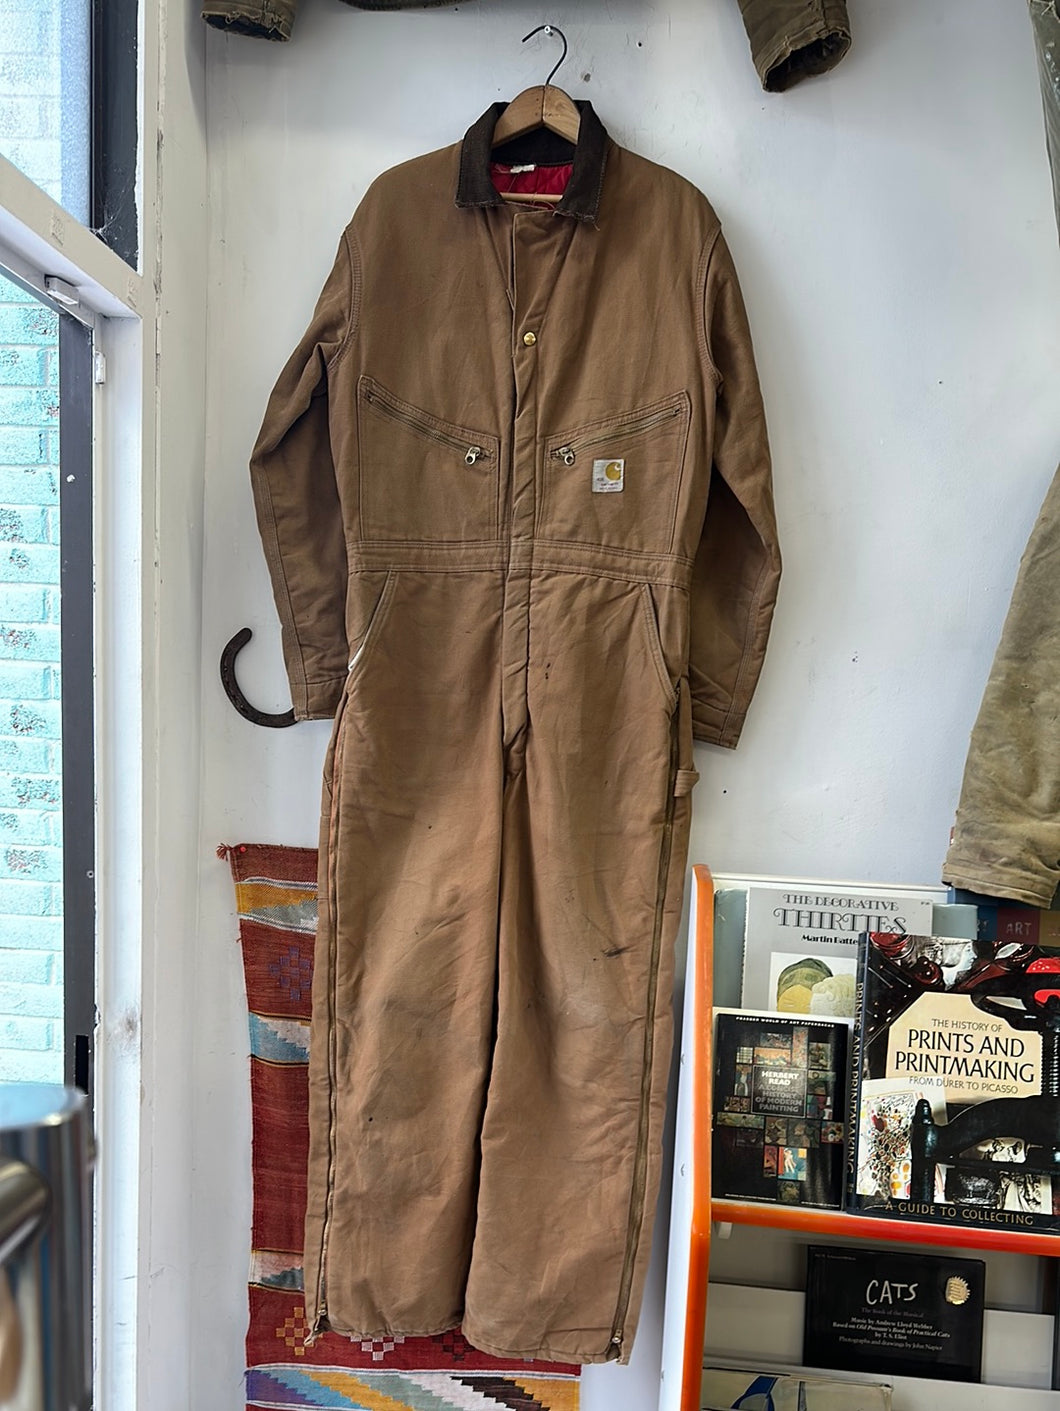 1960s/'70s Carhartt Insulated Coveralls